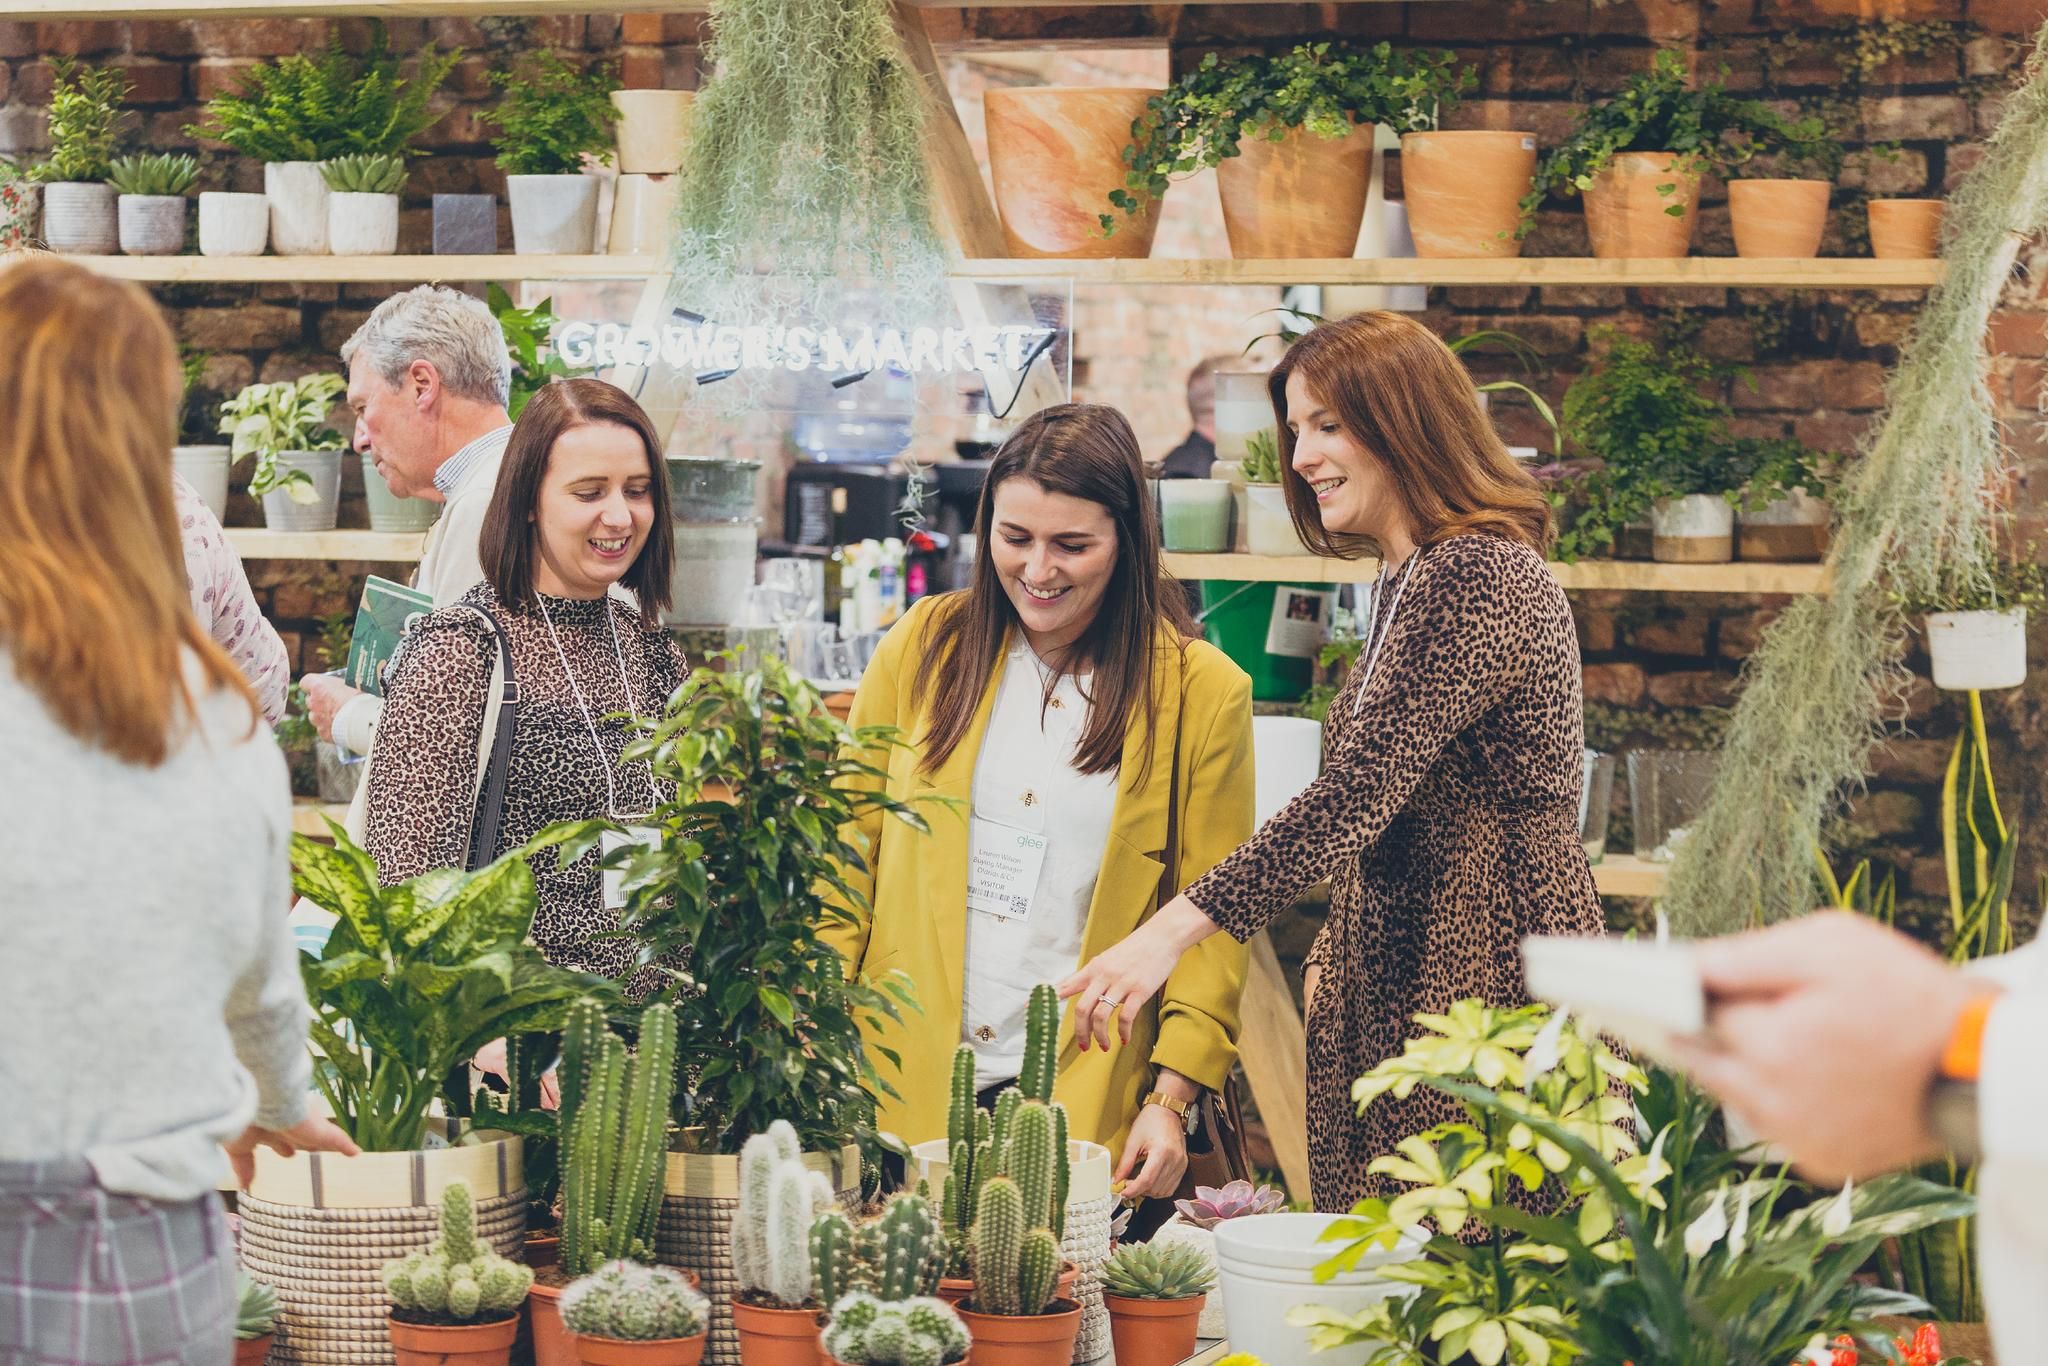 Glee 2020: Explore the roots of British gardening and help your business bloom